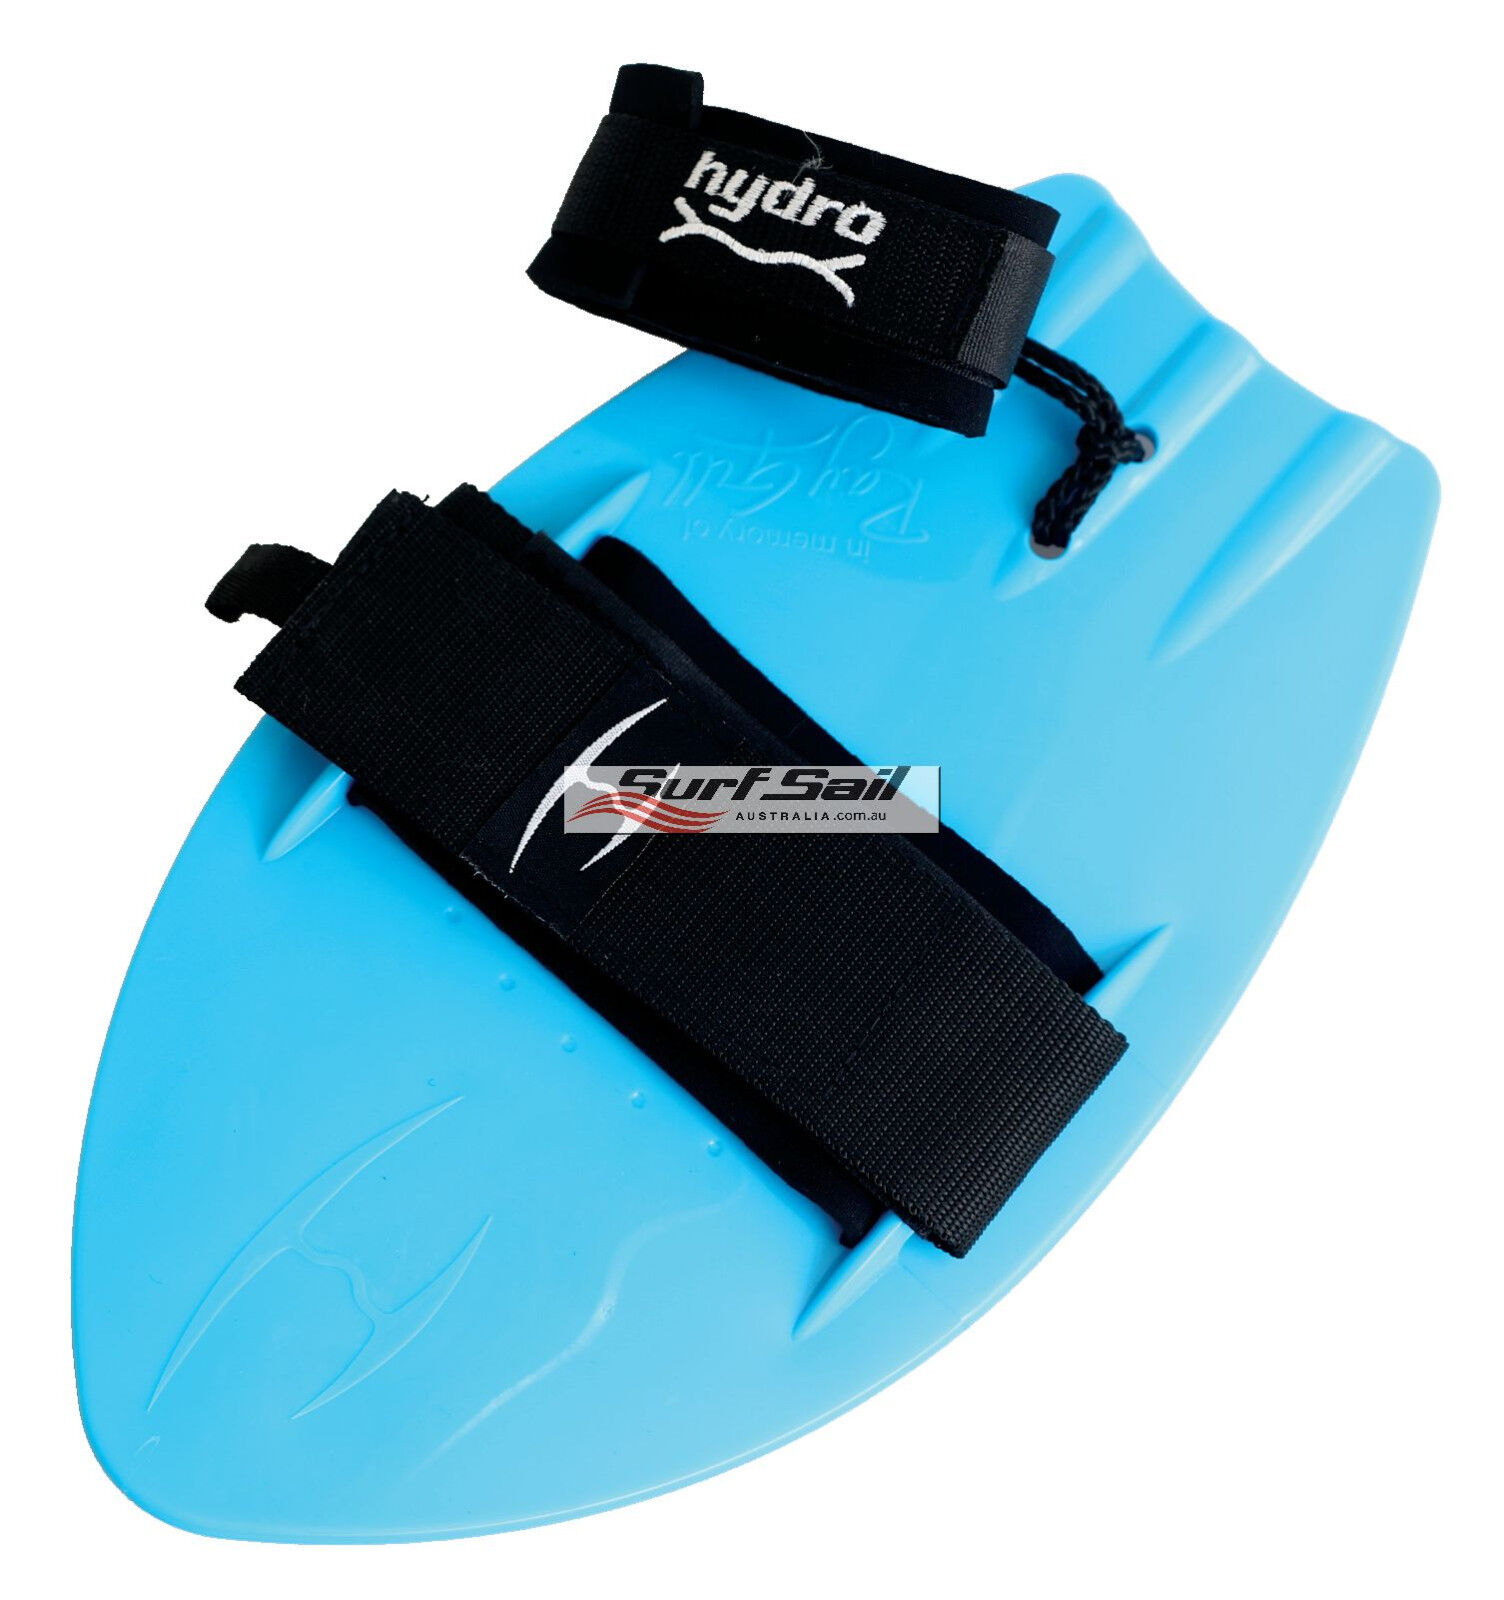 Hydro Body sold out Surfer Handboard Pro OFFicial site